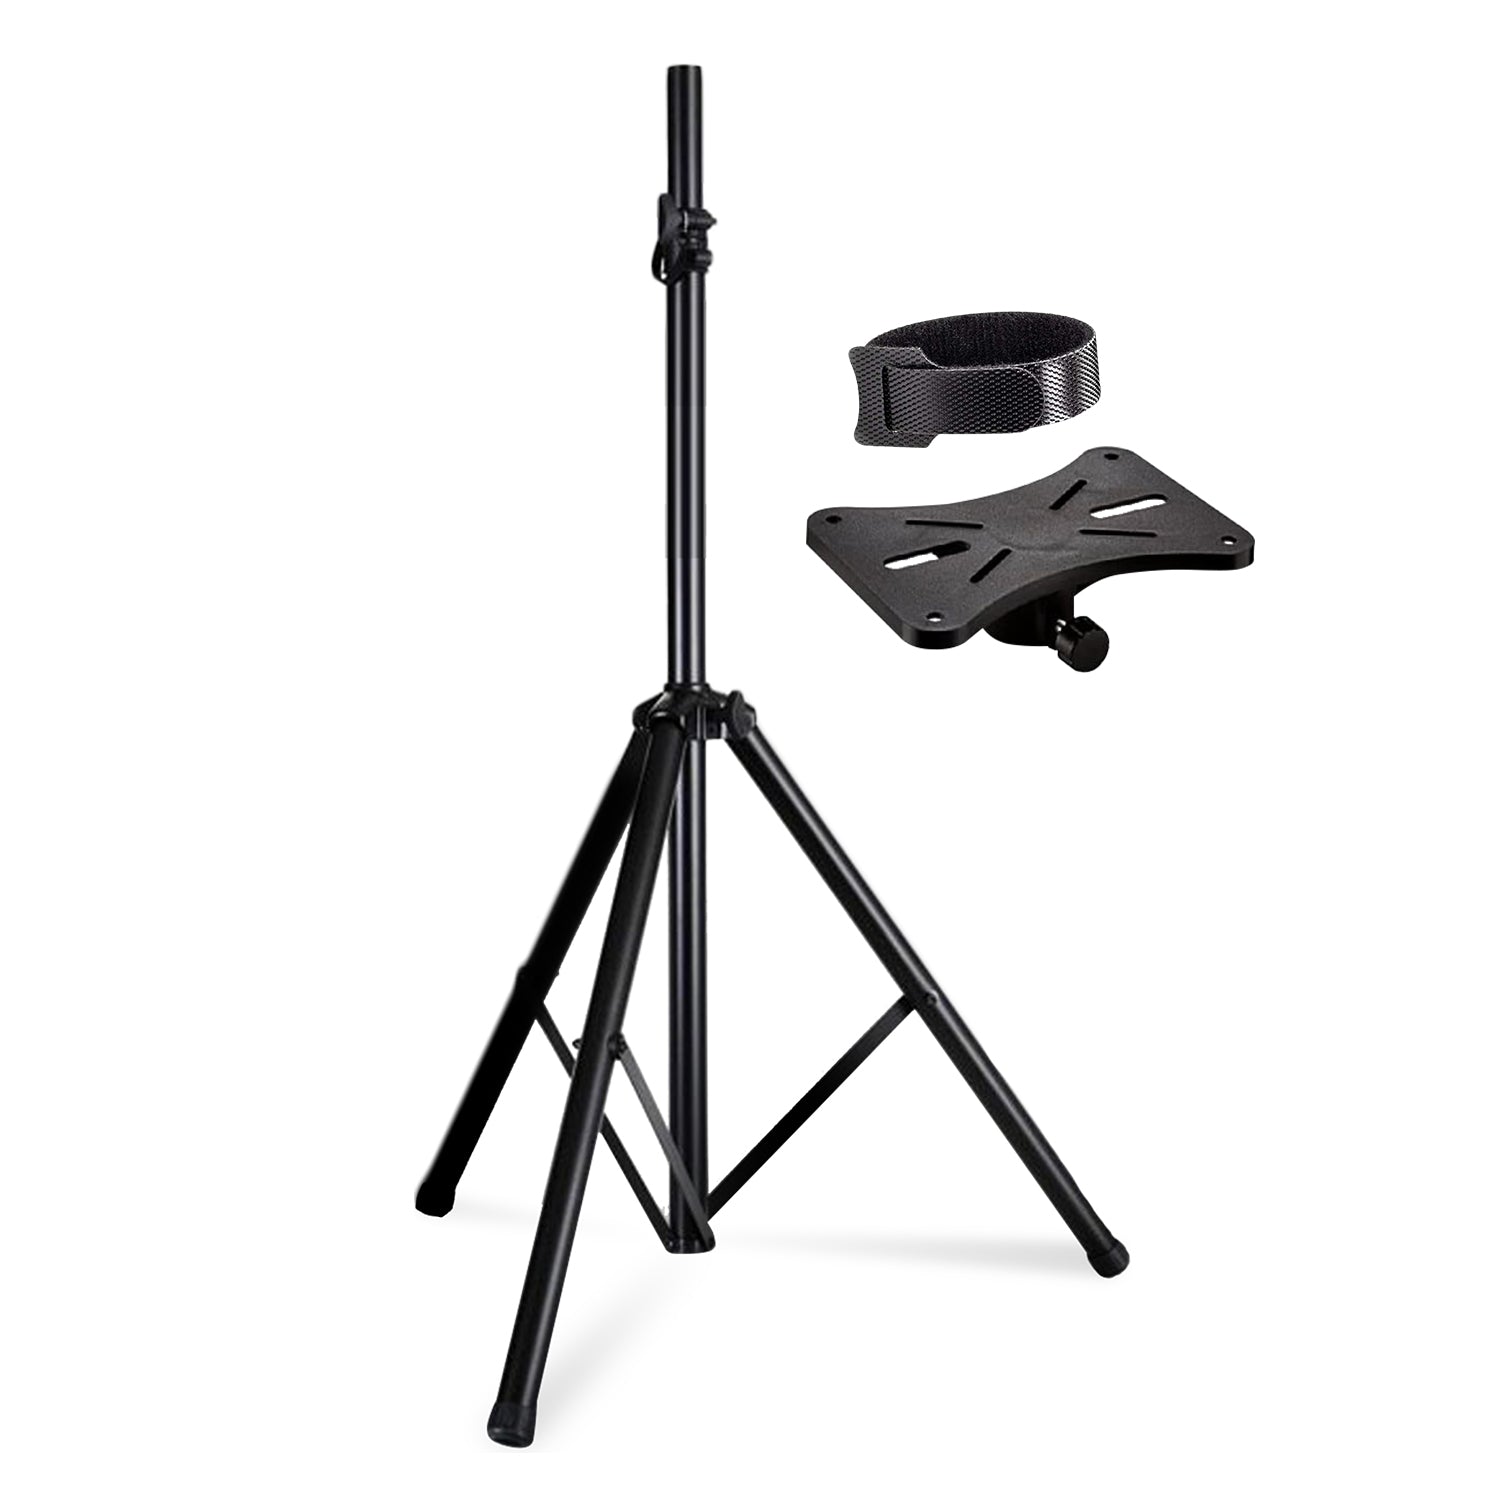 5 Core Universal Speaker Stand w Mount Bracket • Height Adjustable Tripod Stands 100 lbs Capacity